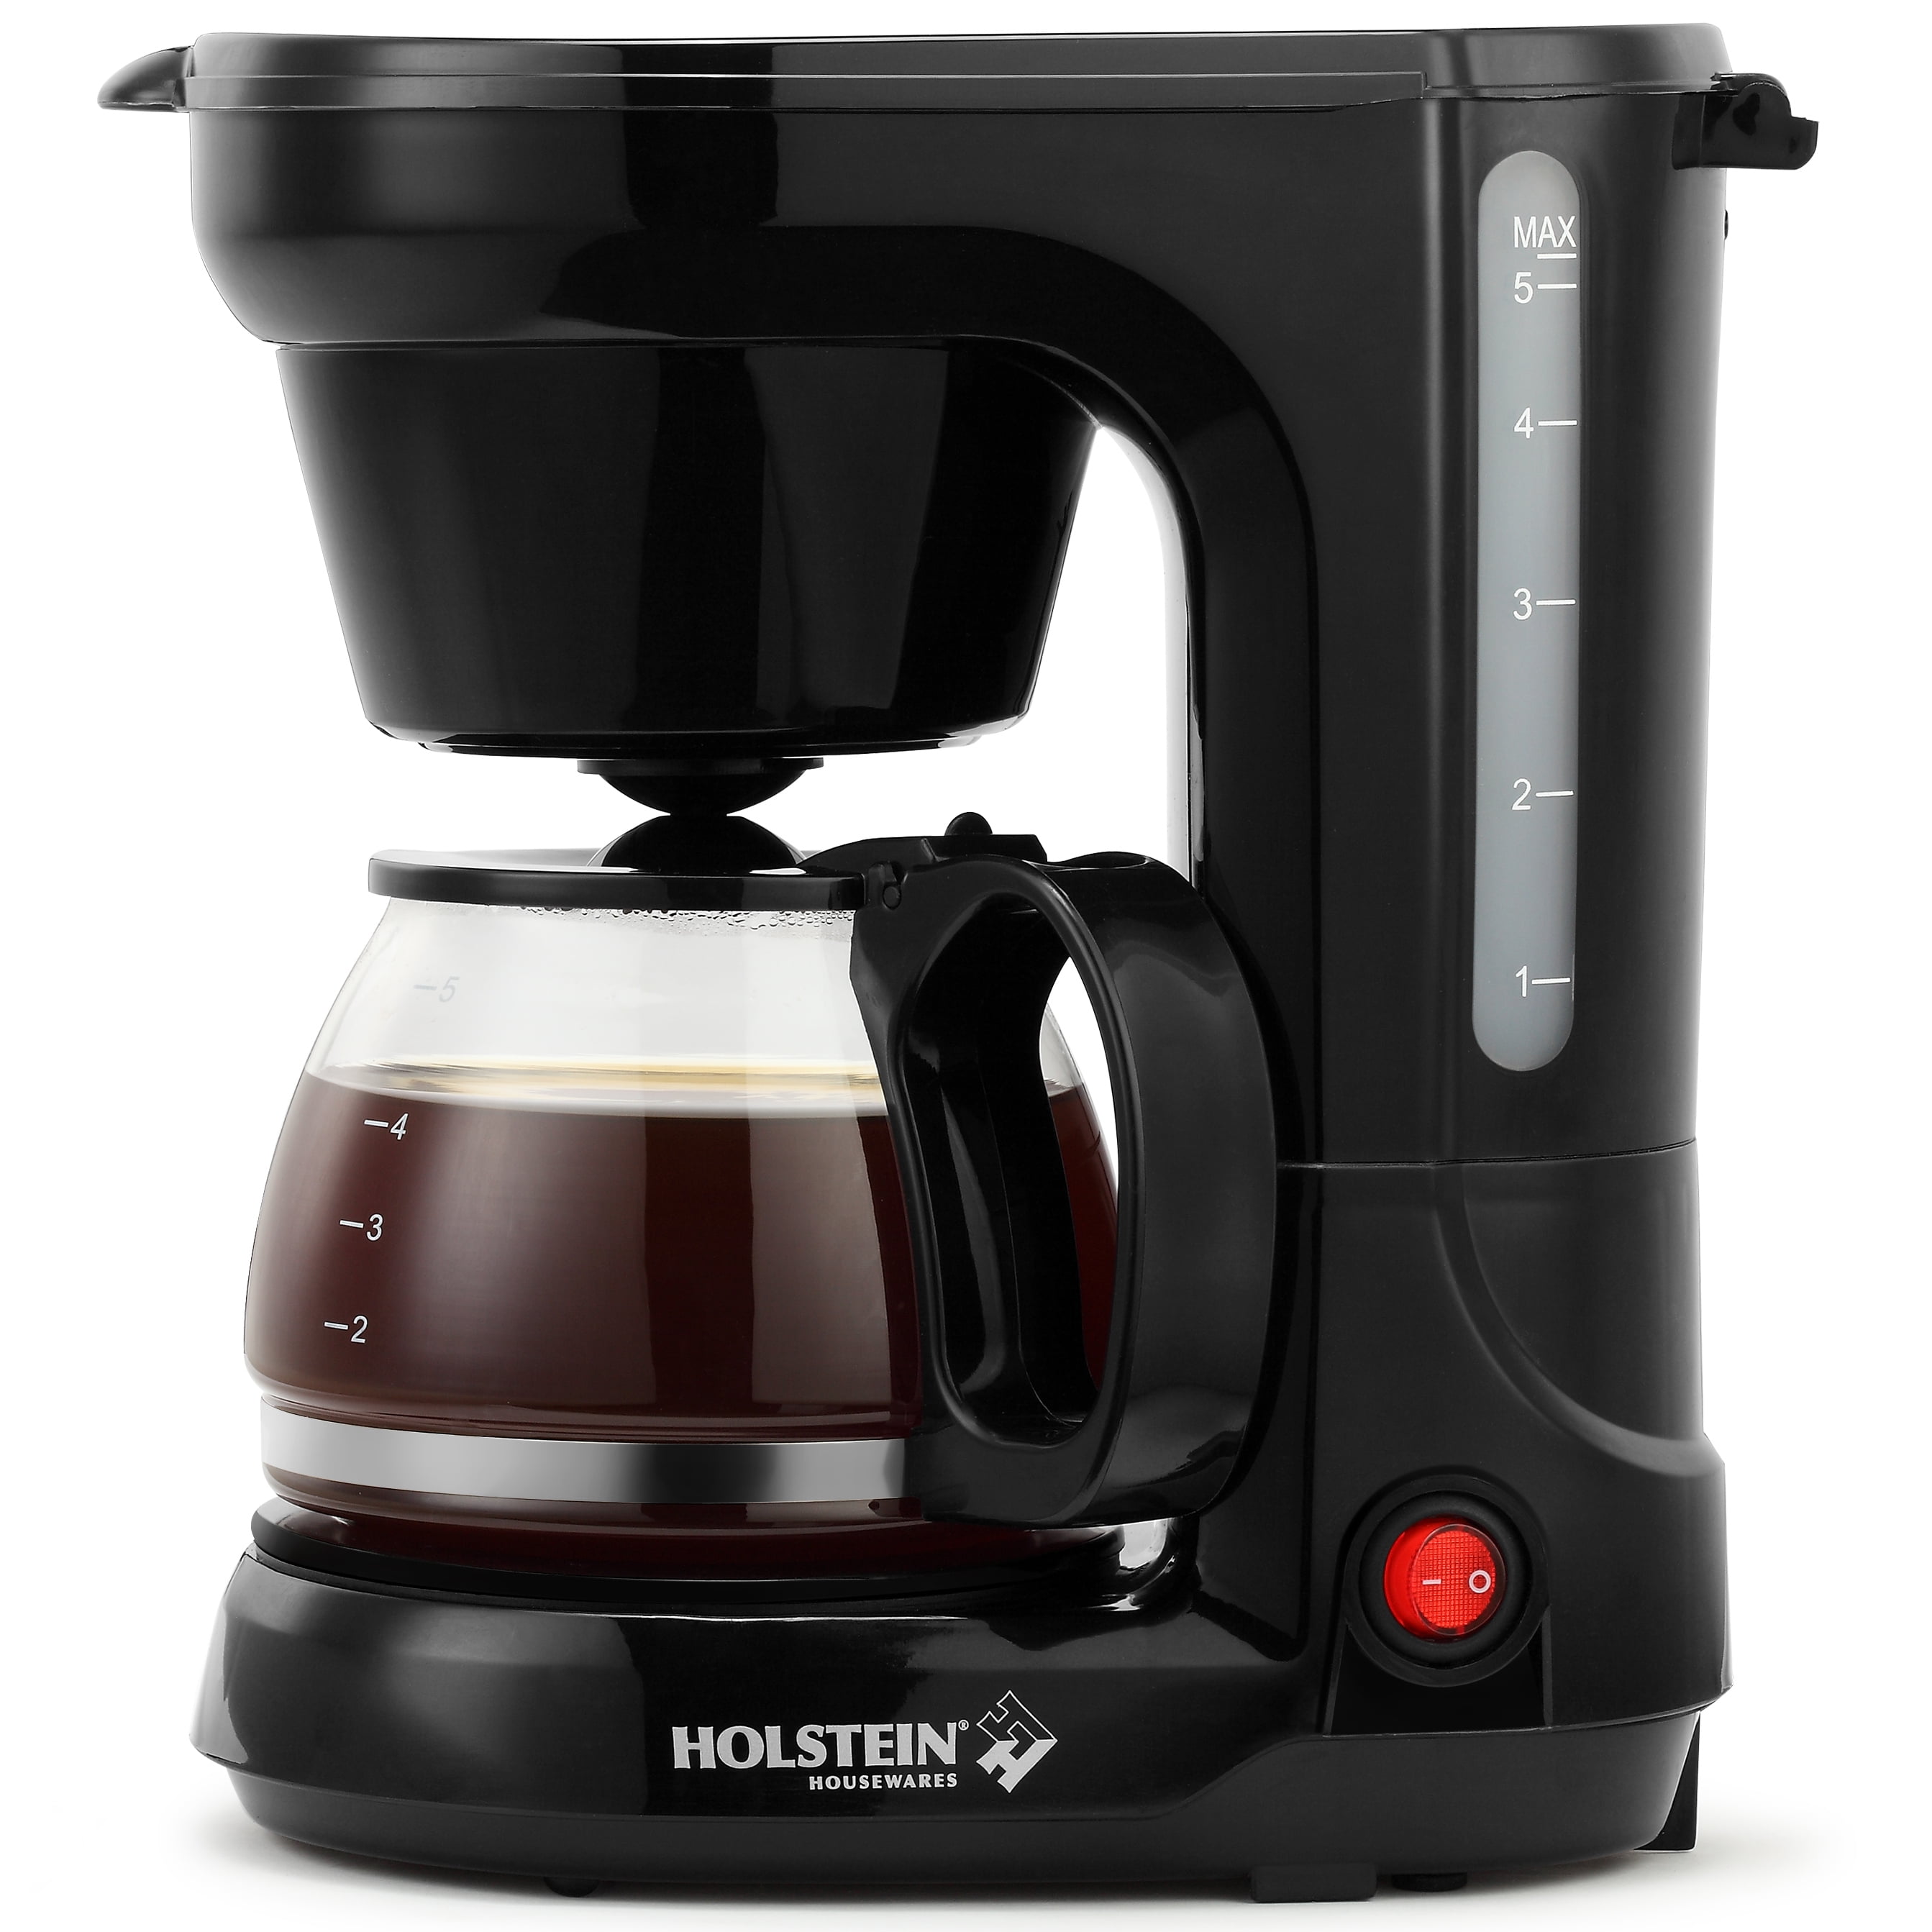 HOLSTEIN HOUSEWARES Everyday 5-Cup Mint Coffee Maker HH-0914701I